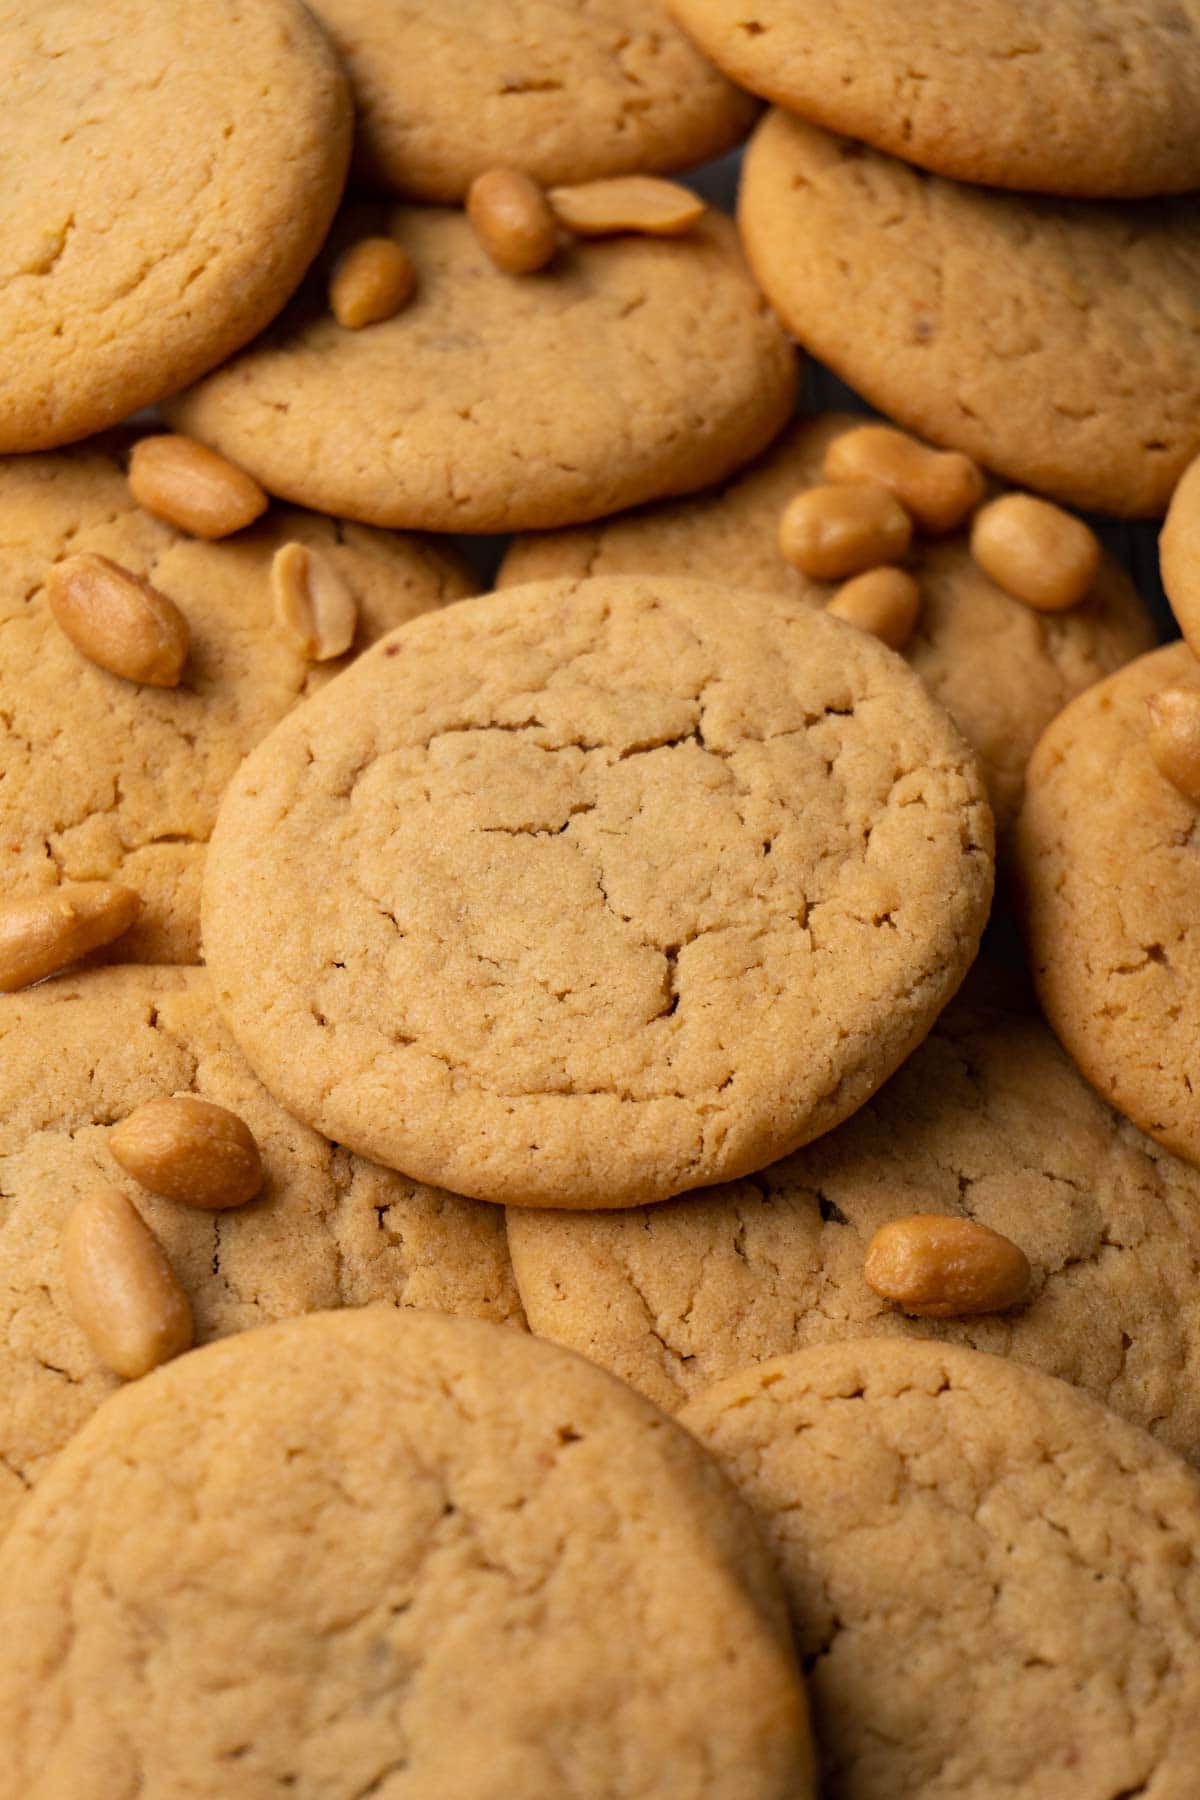 Cookies are lying on top of each other in a pile. Roasted peanuts sprinkled on top of the cookies.